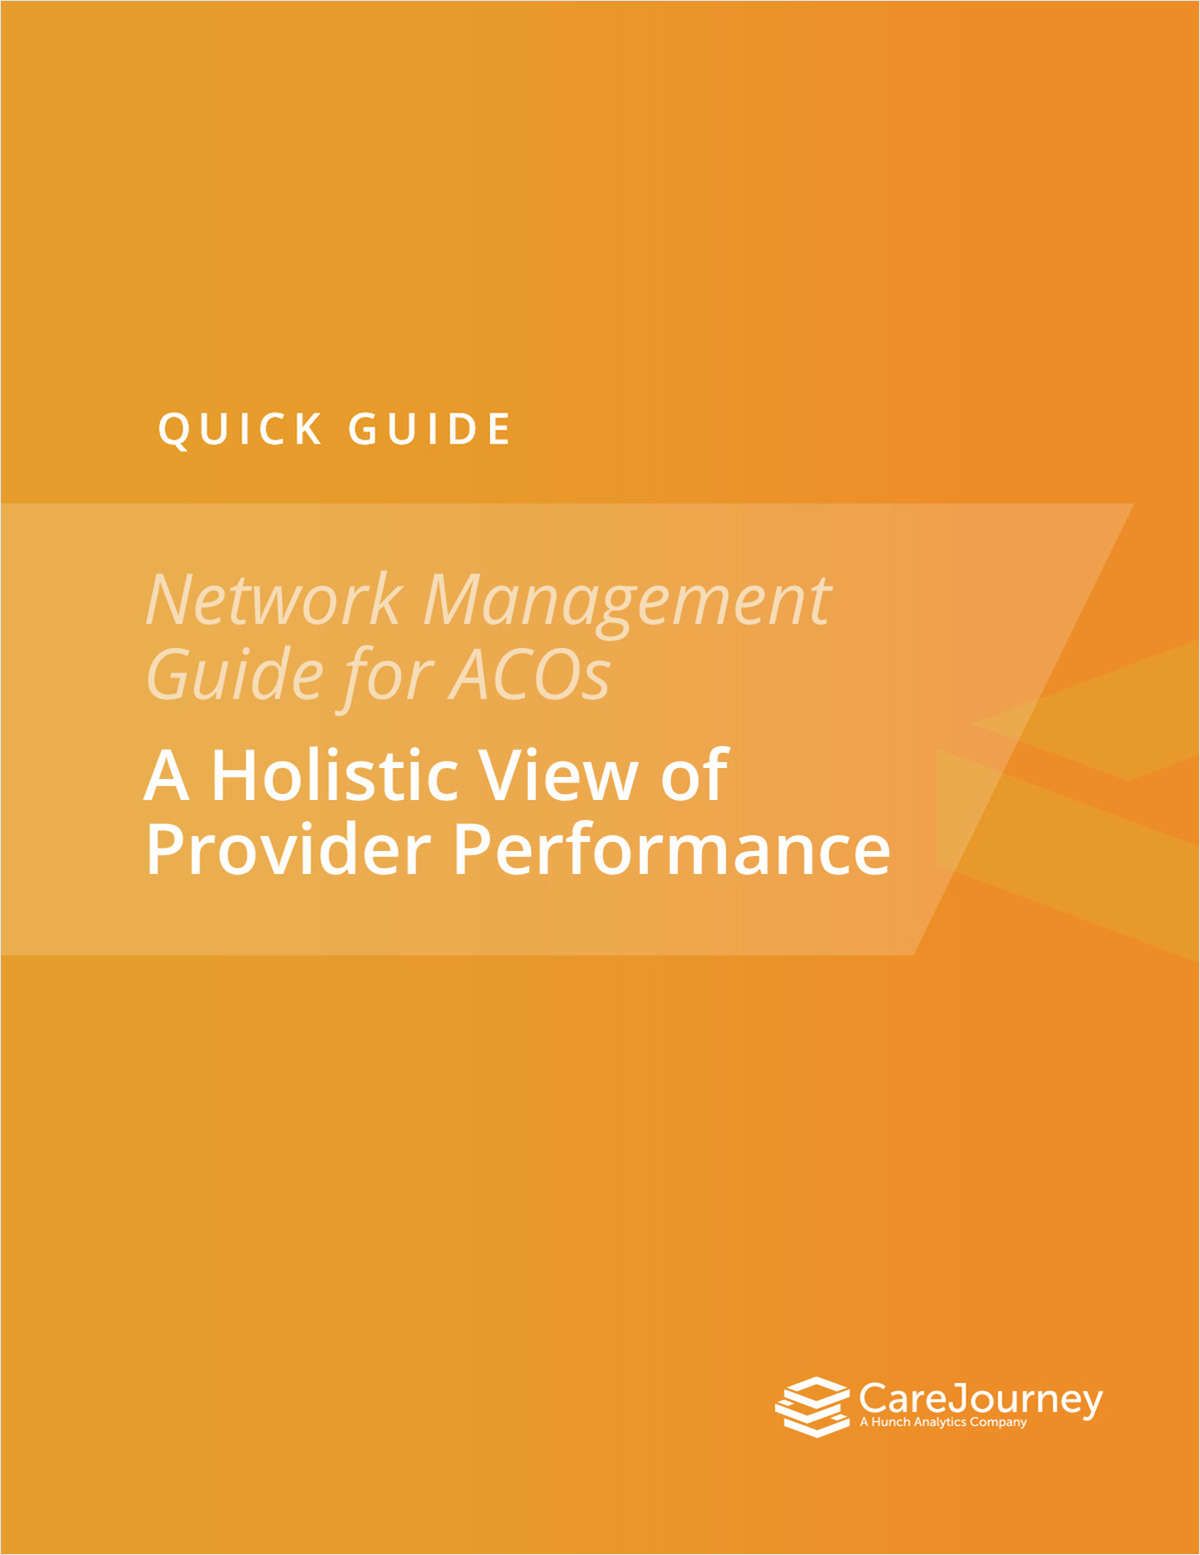 Network Management Guide for ACOs